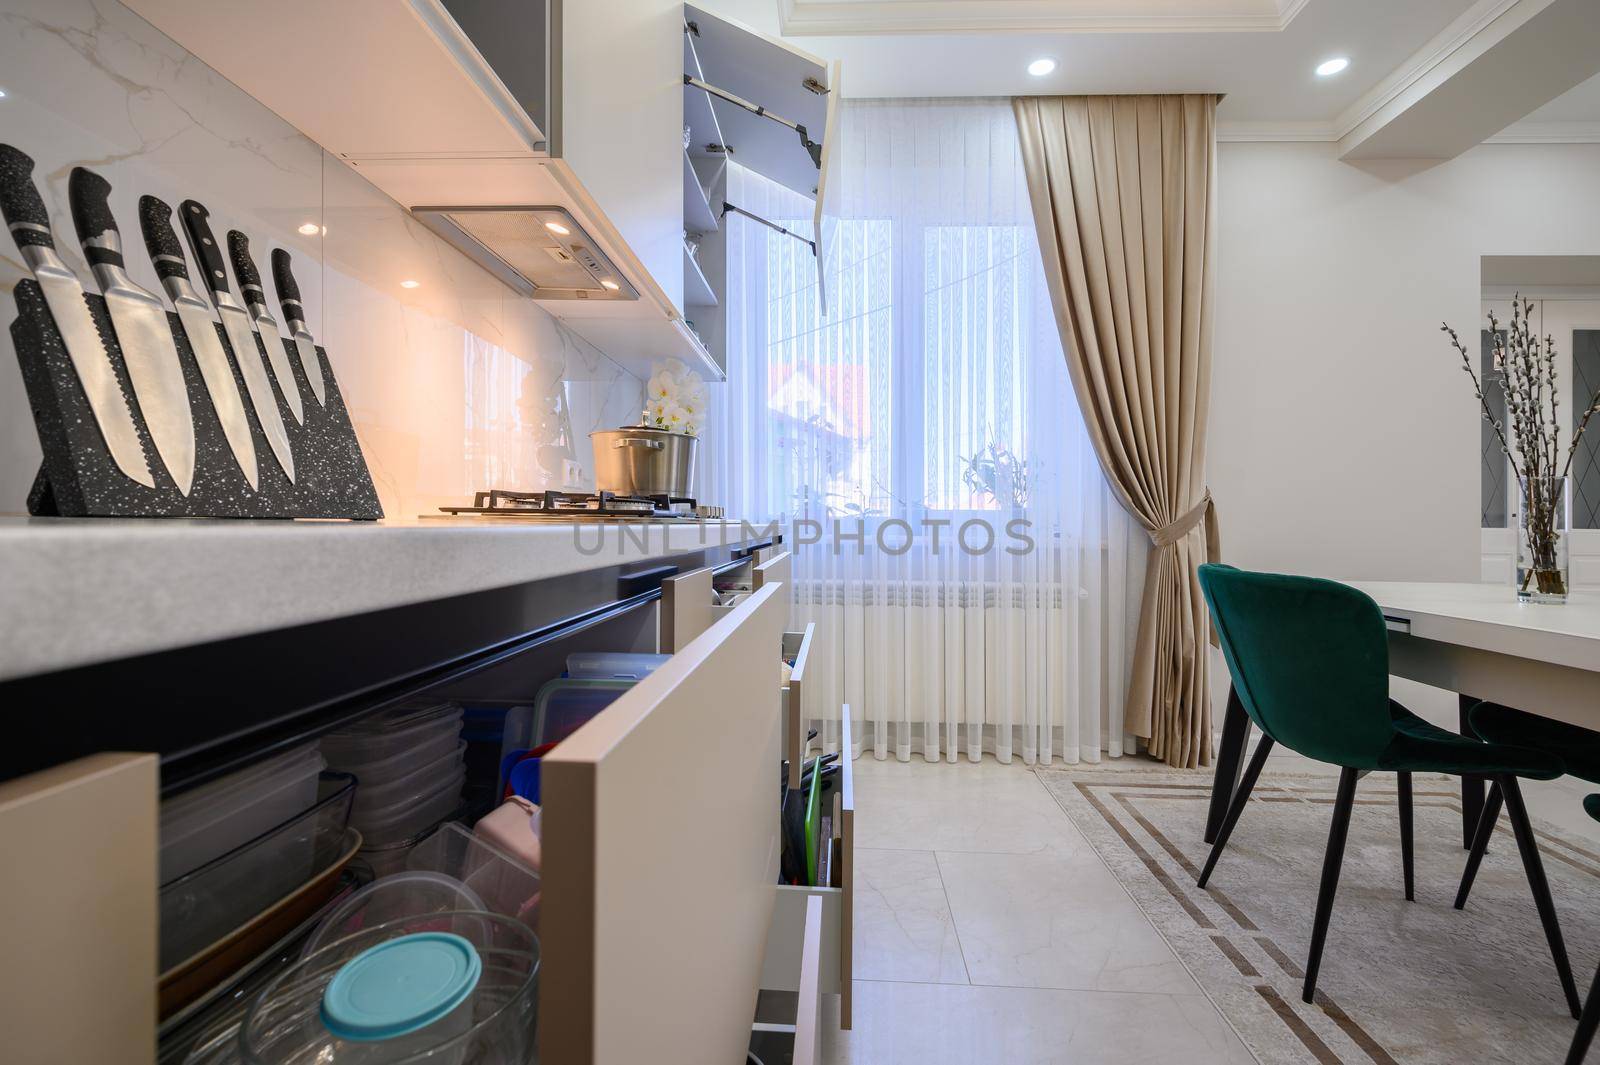 Details of modern white and beige luxurious kitchen in studio apartment interior, some drawers are open